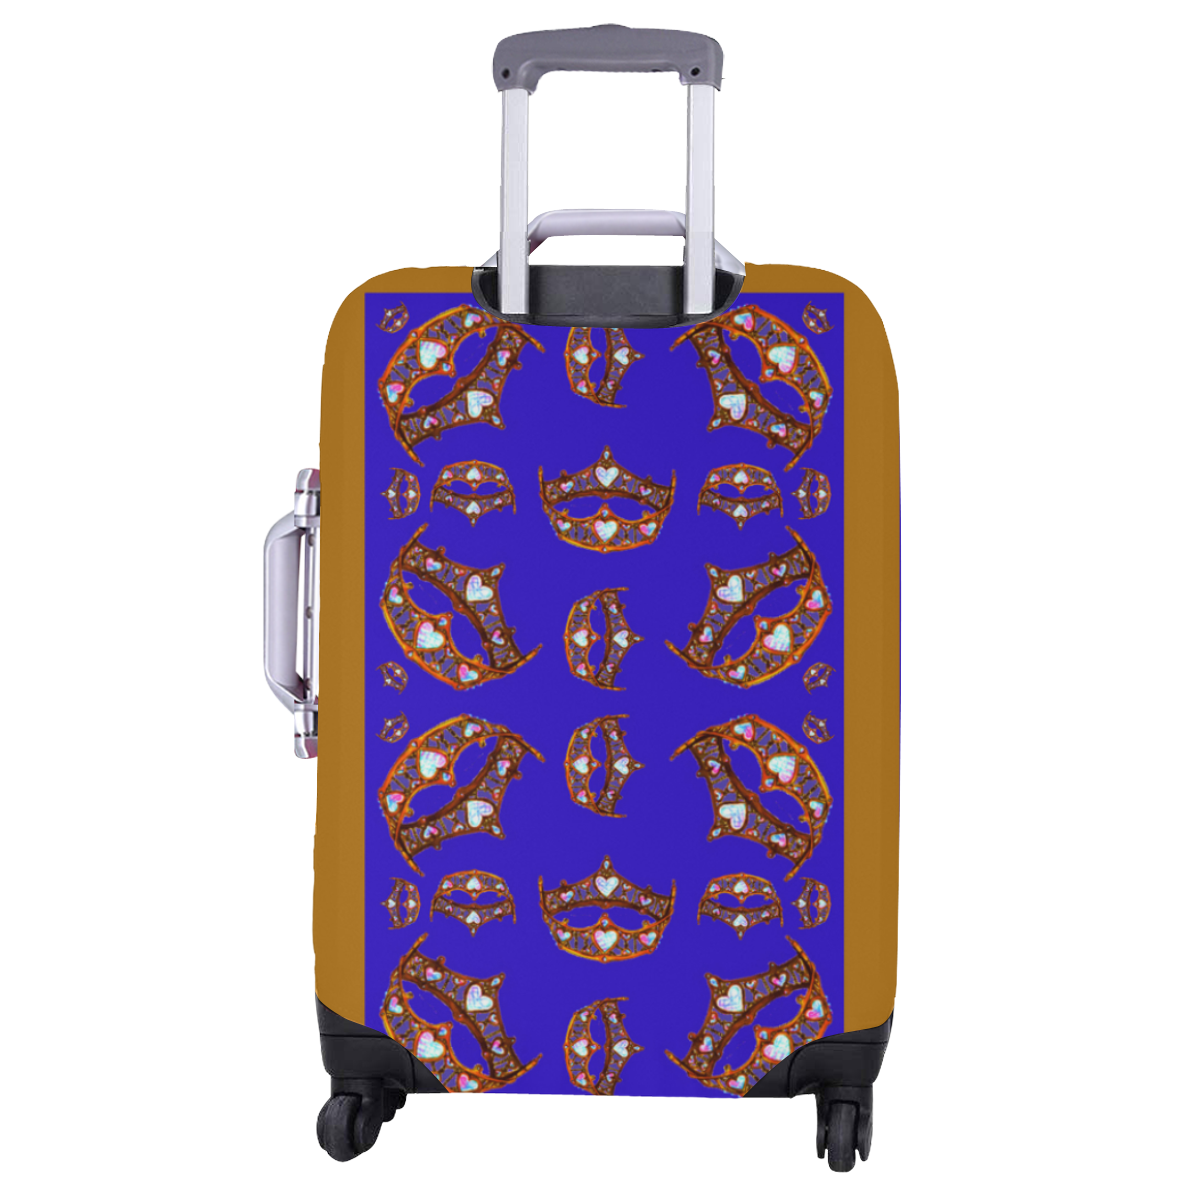 Queen of Hearts Gold Crown Tiara scattered pattern blue background luggage Luggage Cover/Large 26"-28"